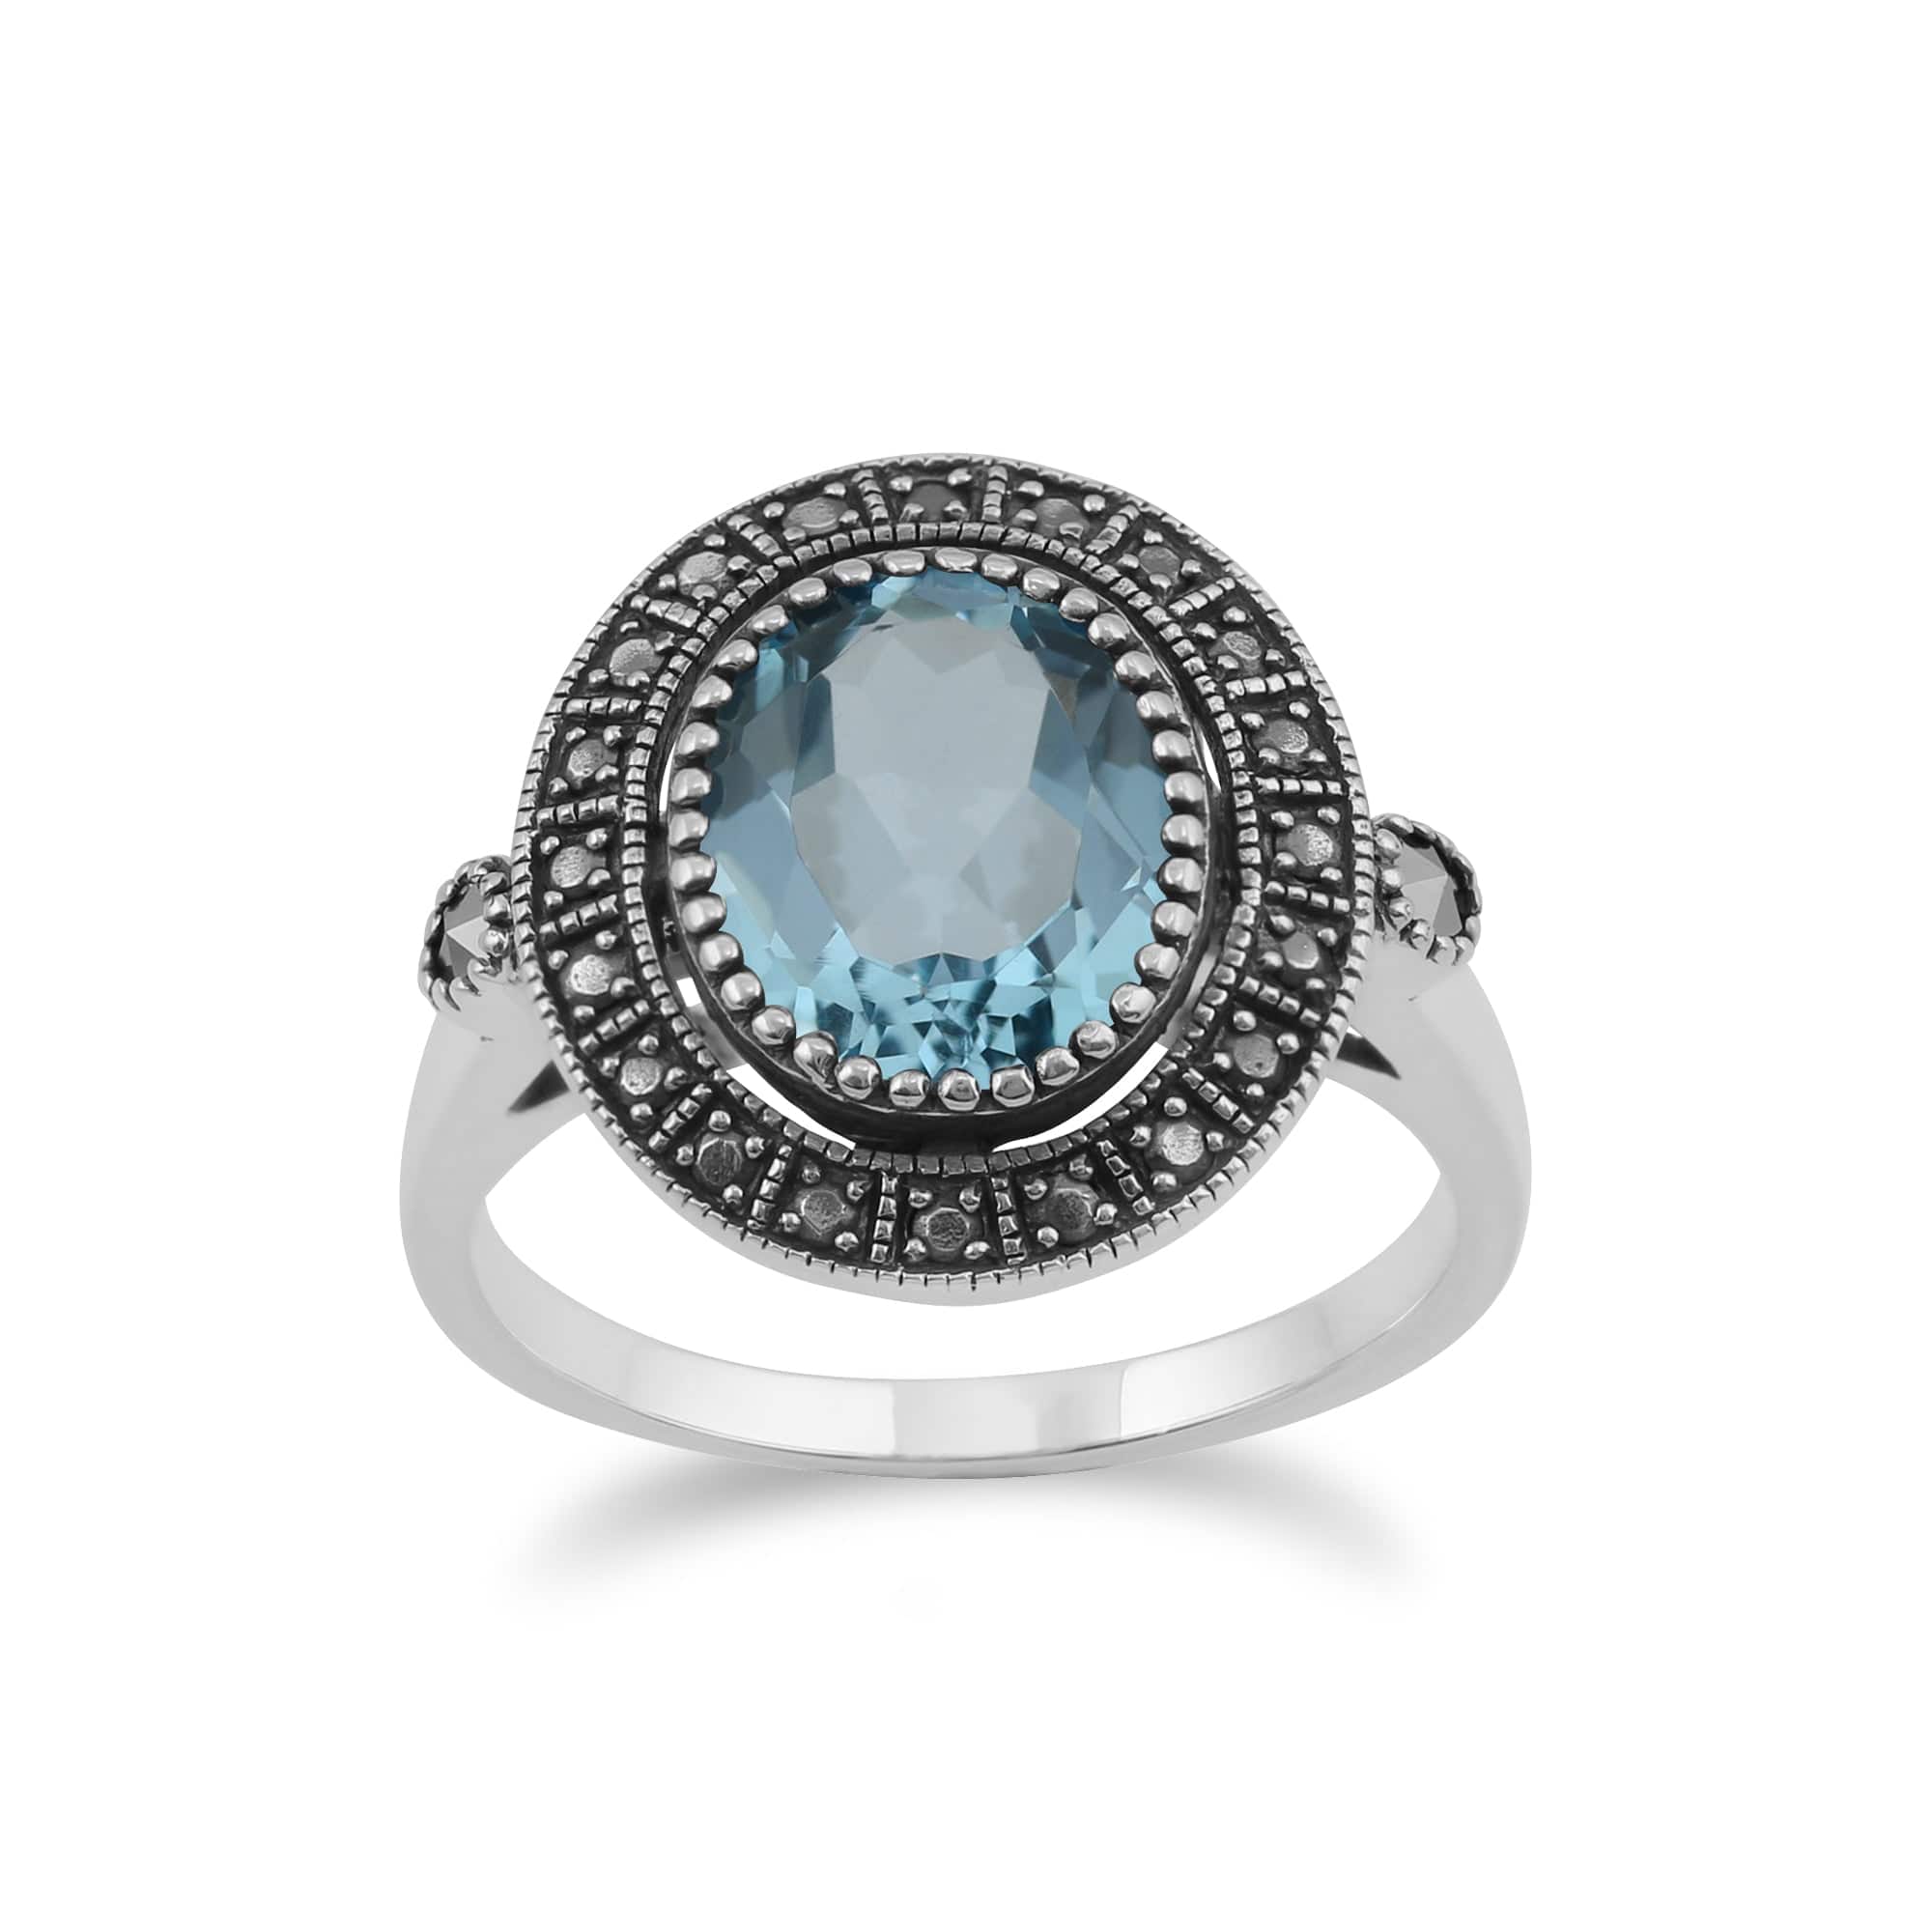 Image of Art Deco Style Oval Blue Topaz & Marcasite Statement Cocktail Ring In Sterling Silver